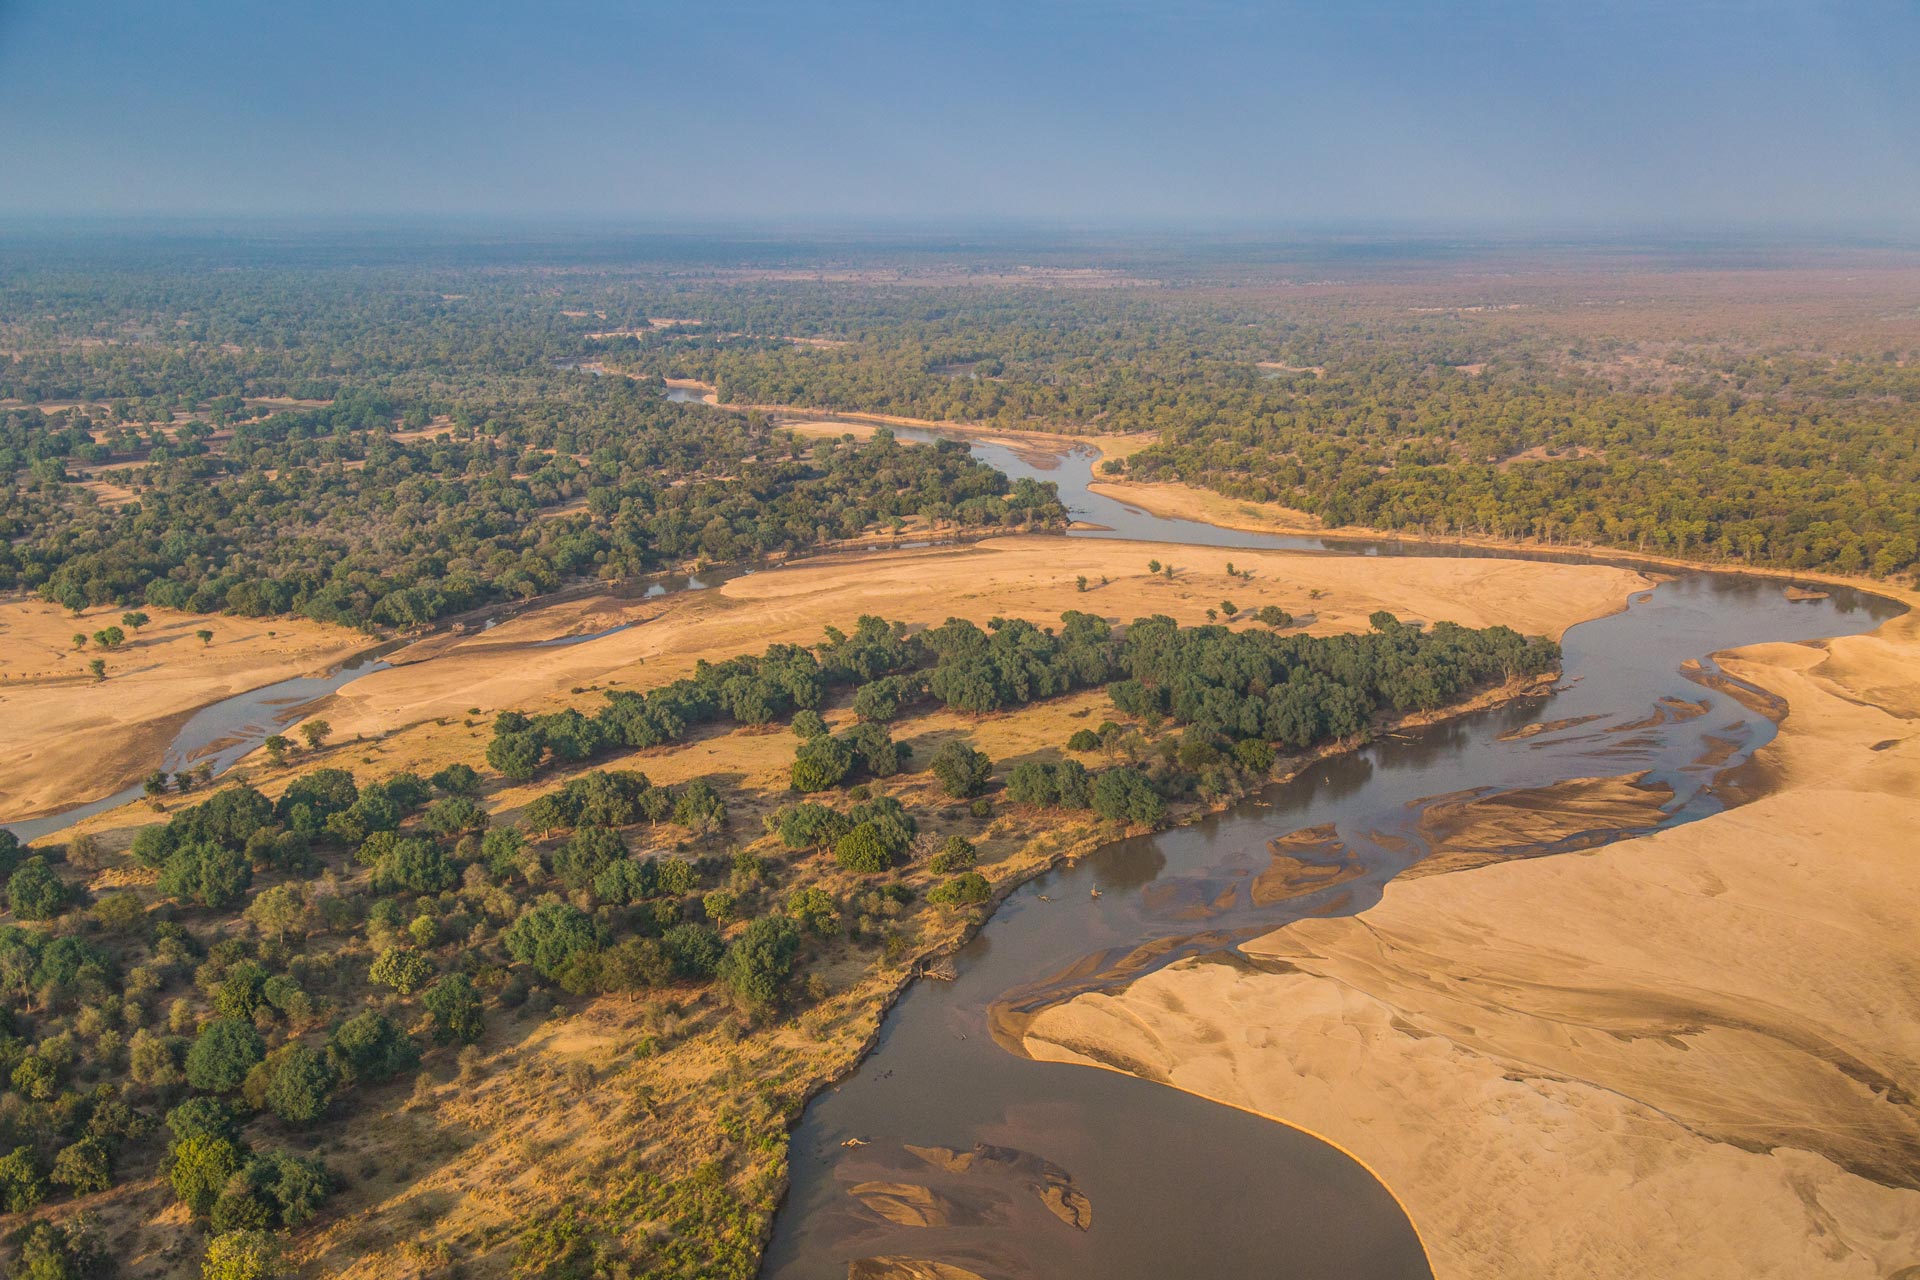 Day 4 to Day 6, Luangwa River Camp in South Luangwa